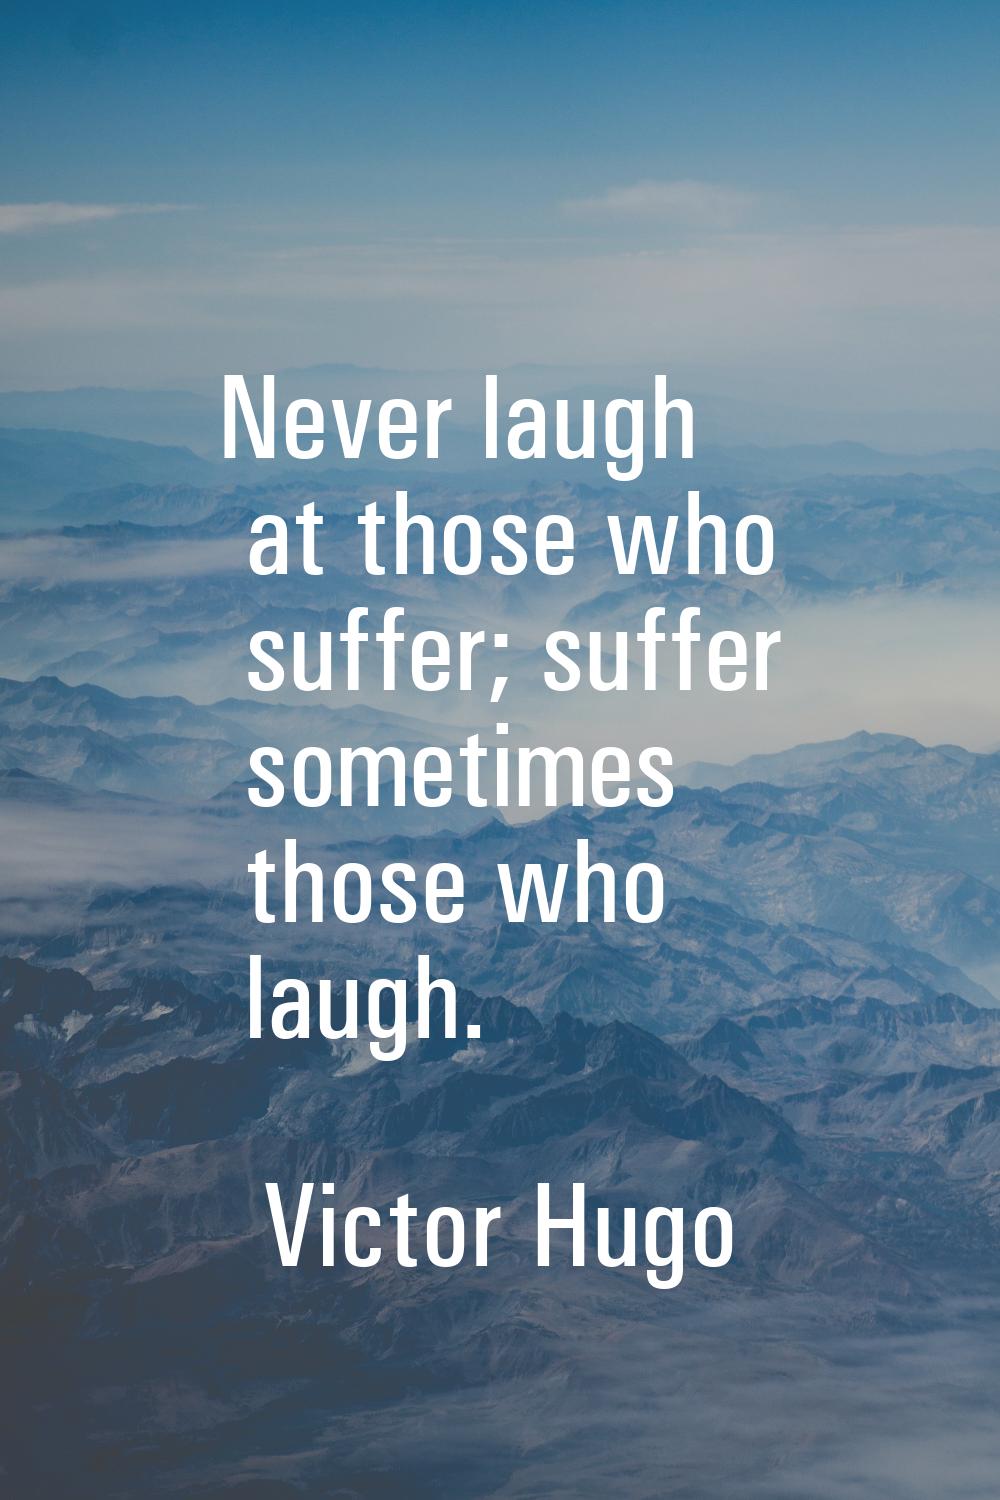 Never laugh at those who suffer; suffer sometimes those who laugh.